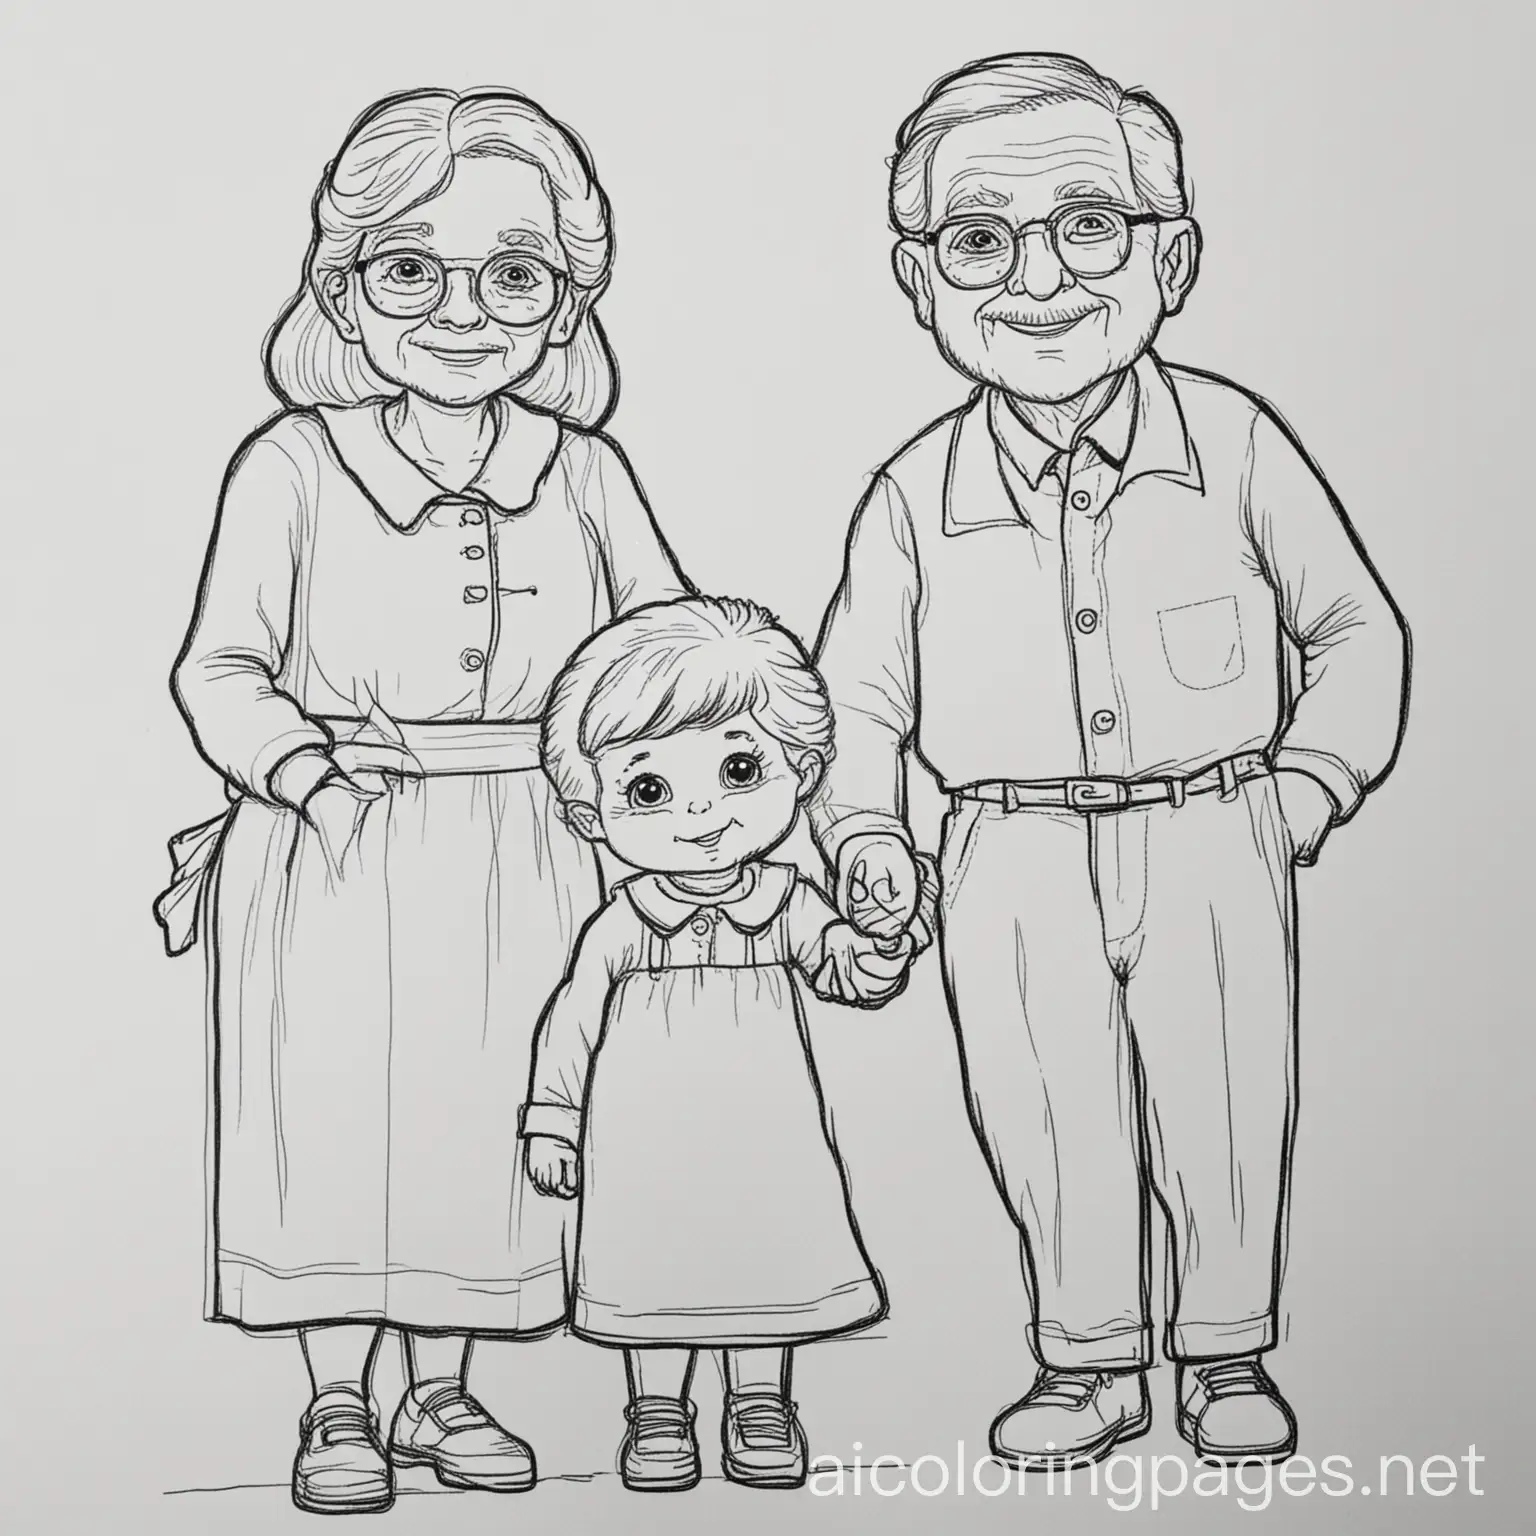 grandma and grandpa with kids, Coloring Page, black and white, line art, white background, Simplicity, Ample White Space. The background of the coloring page is plain white to make it easy for young children to color within the lines. The outlines of all the subjects are easy to distinguish, making it simple for kids to color without too much difficulty